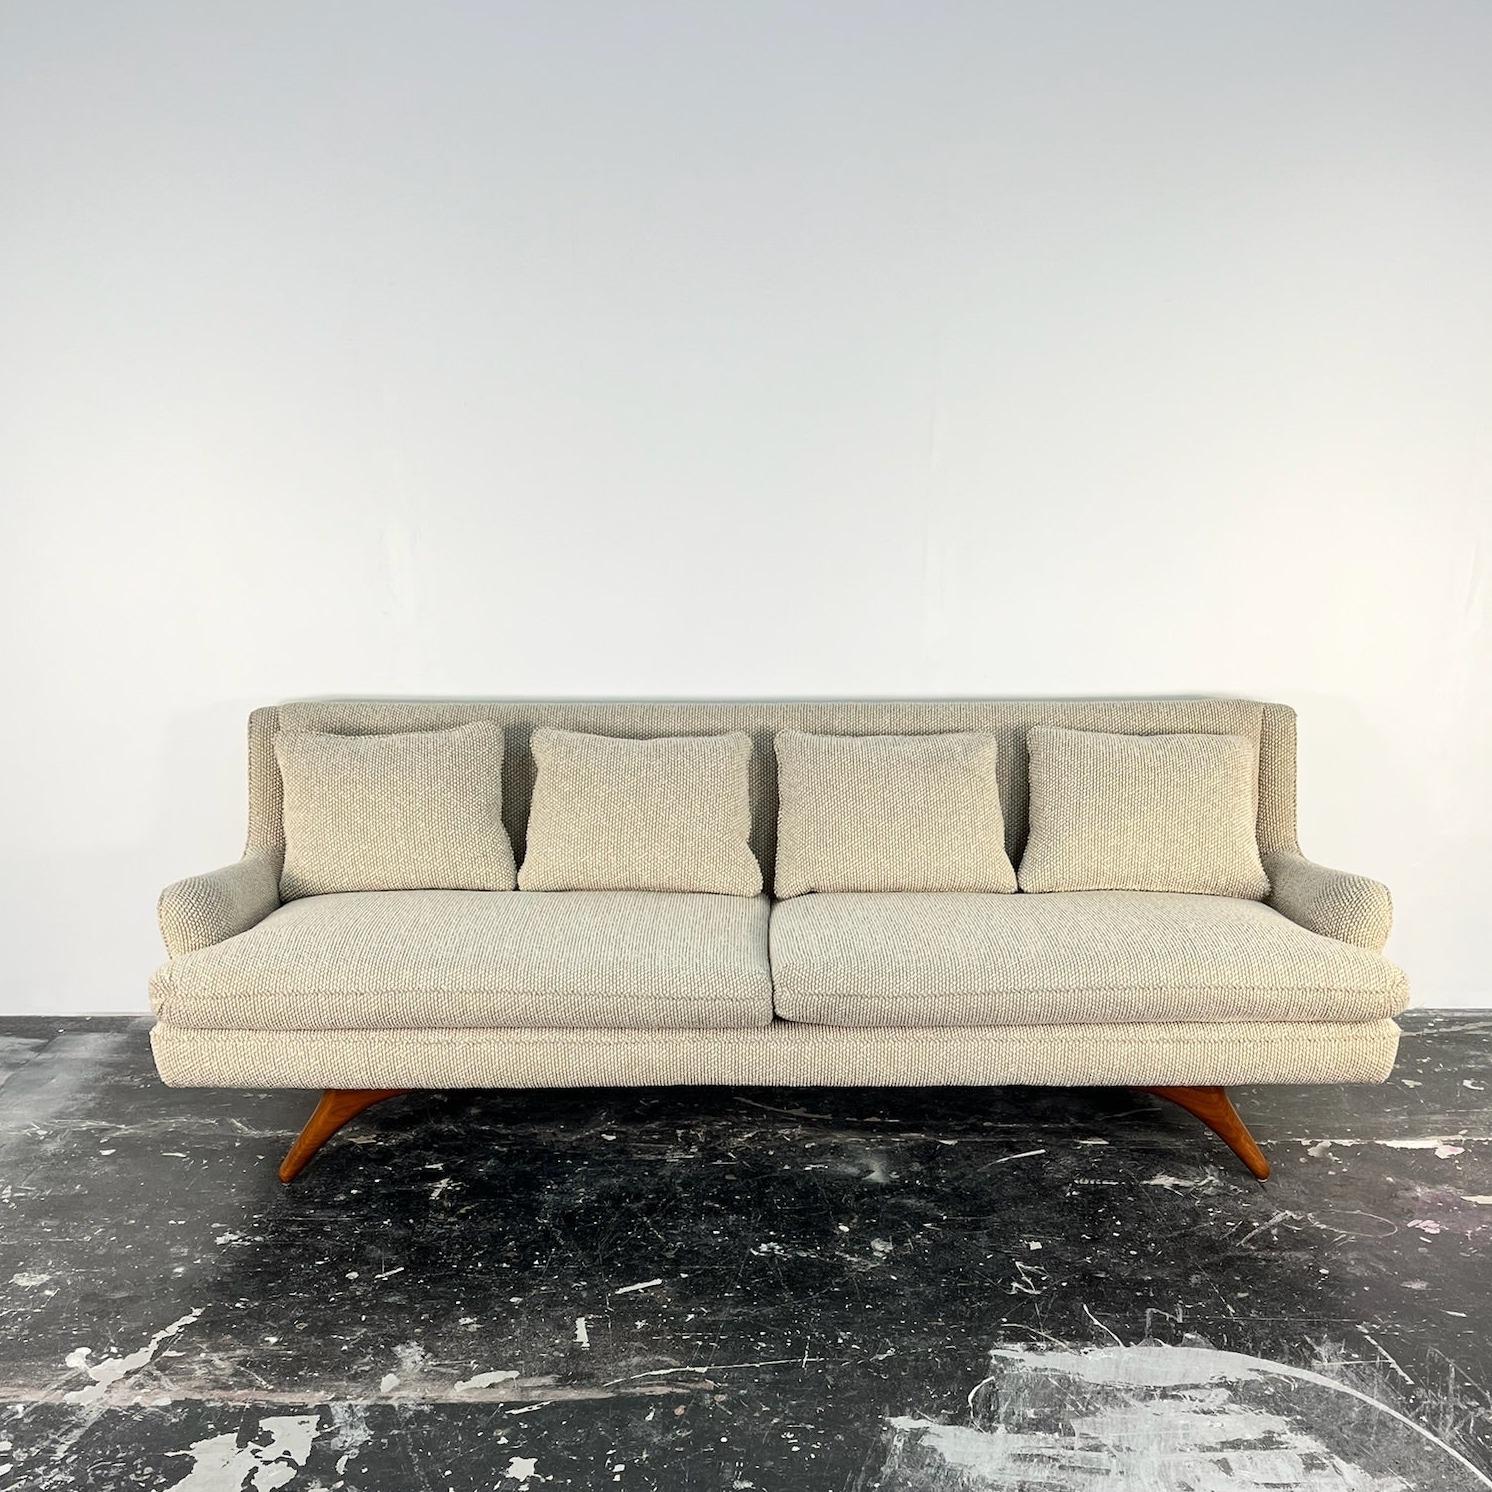 The Venetian Sofa is a rare example in Vladimir Kagan’s repertoire that includes loose cushions. The design dates back to 1956, this inviting sofa features rounded shapes and playfully upturned arms to create a romantic silhouette. Placed on top of